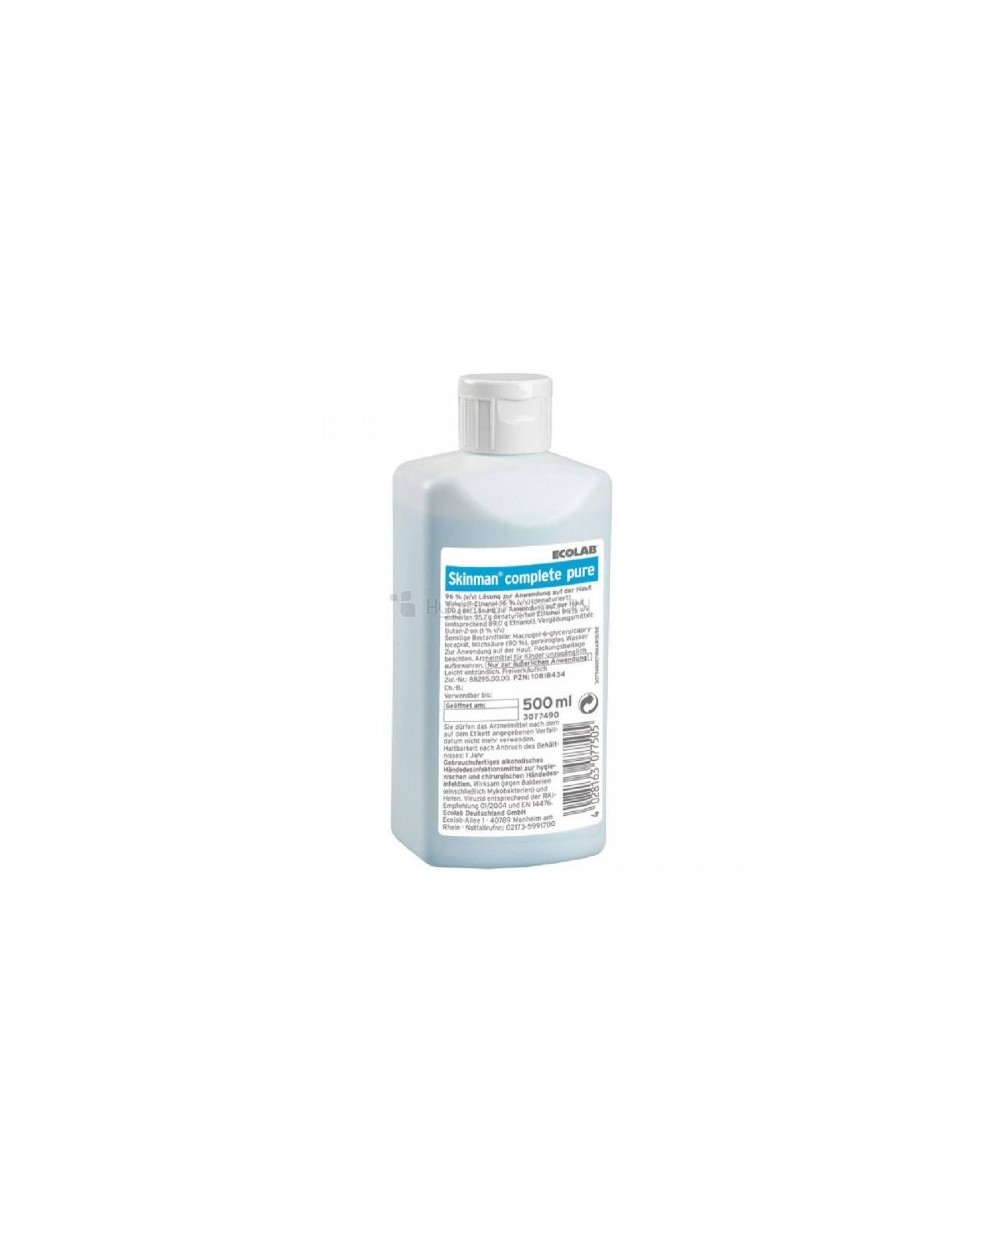 Skinman™ complete pure - 1